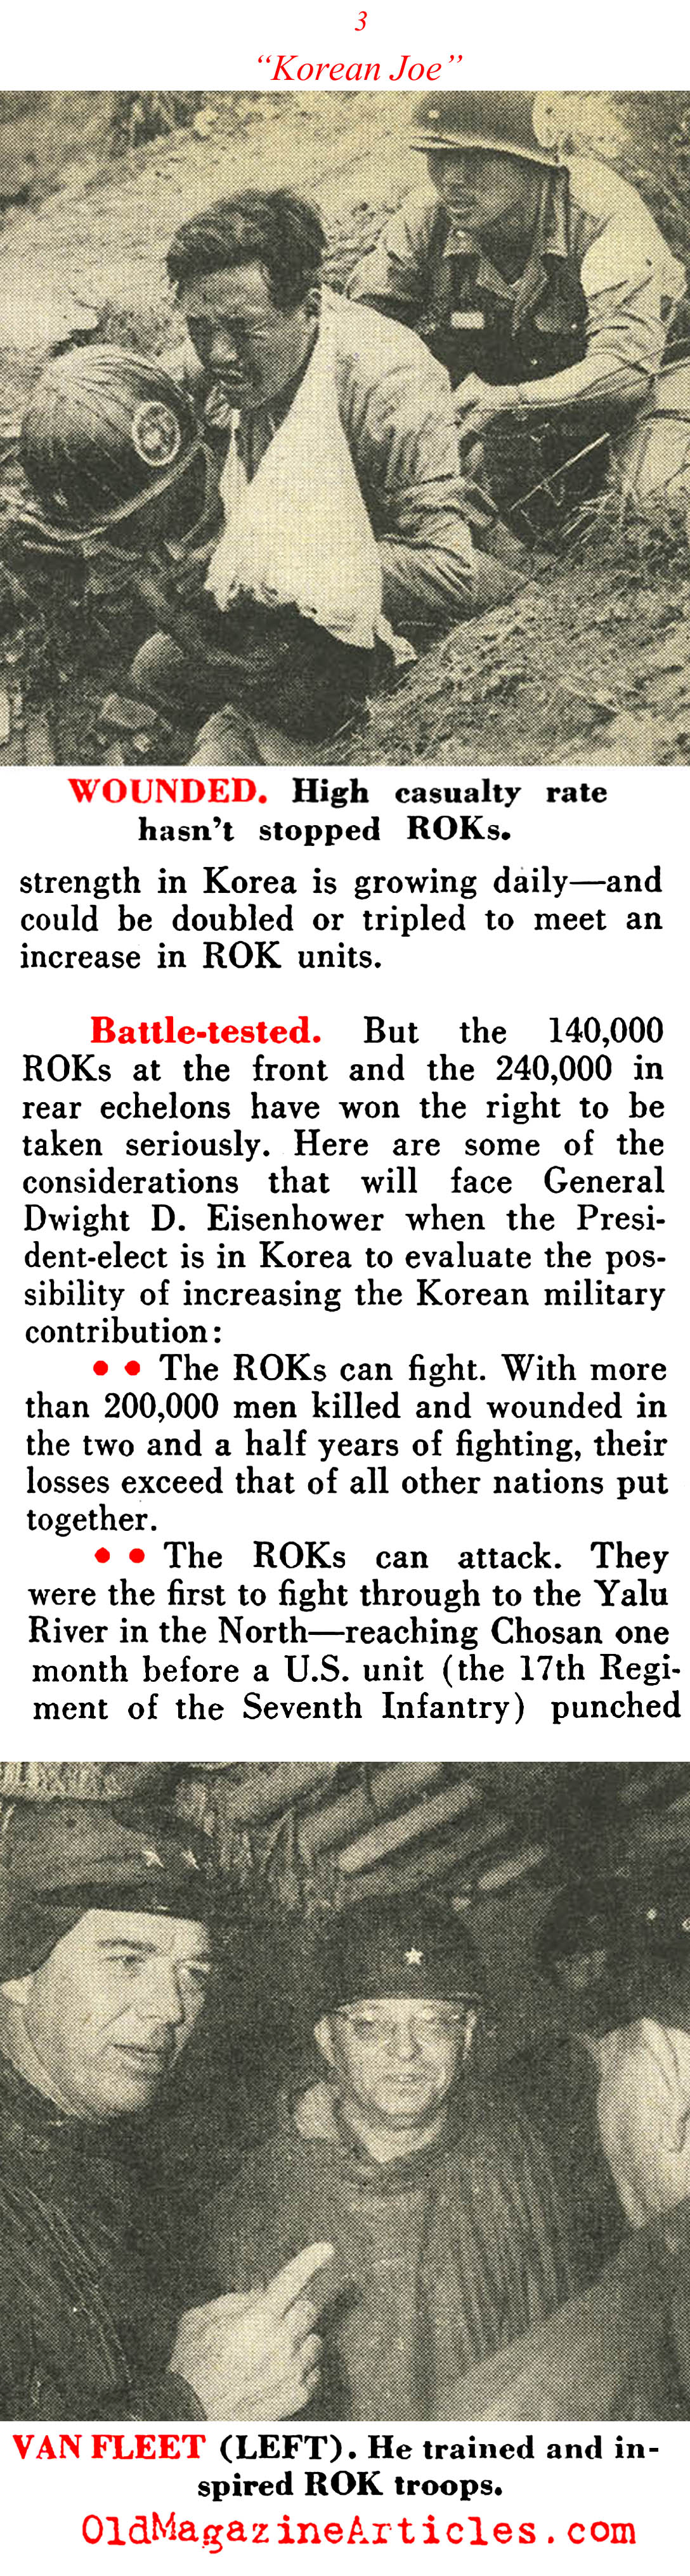 The Reformed South Korean Military (Pathfinder Magazine, 1952)